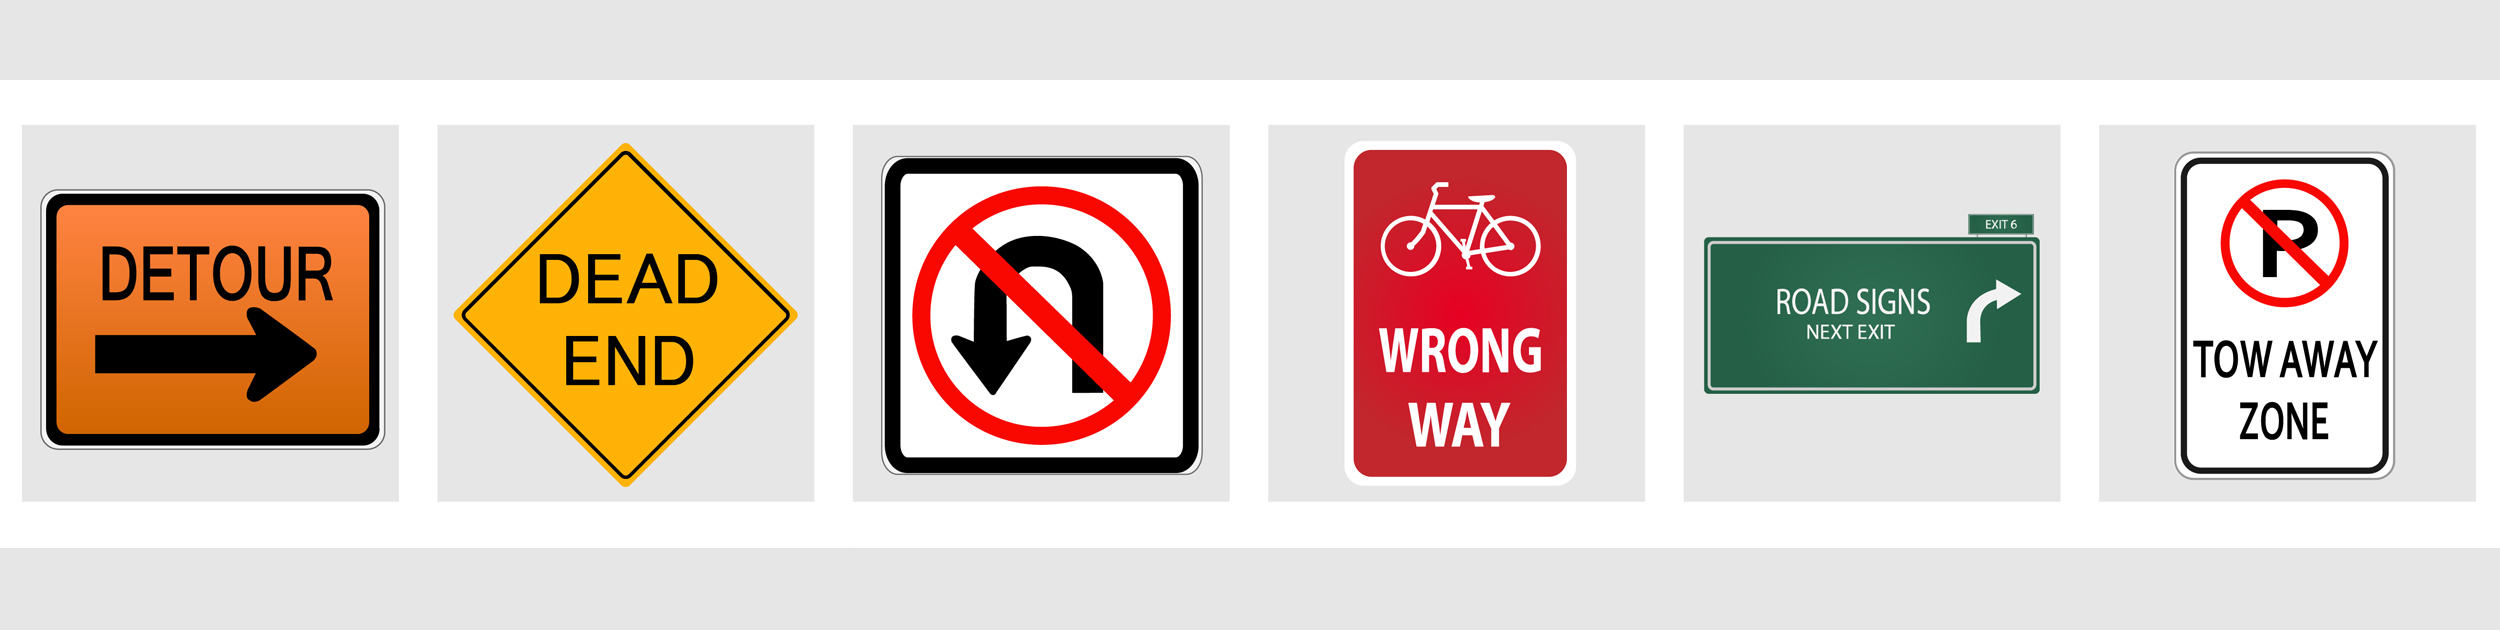 Many different traffic signs